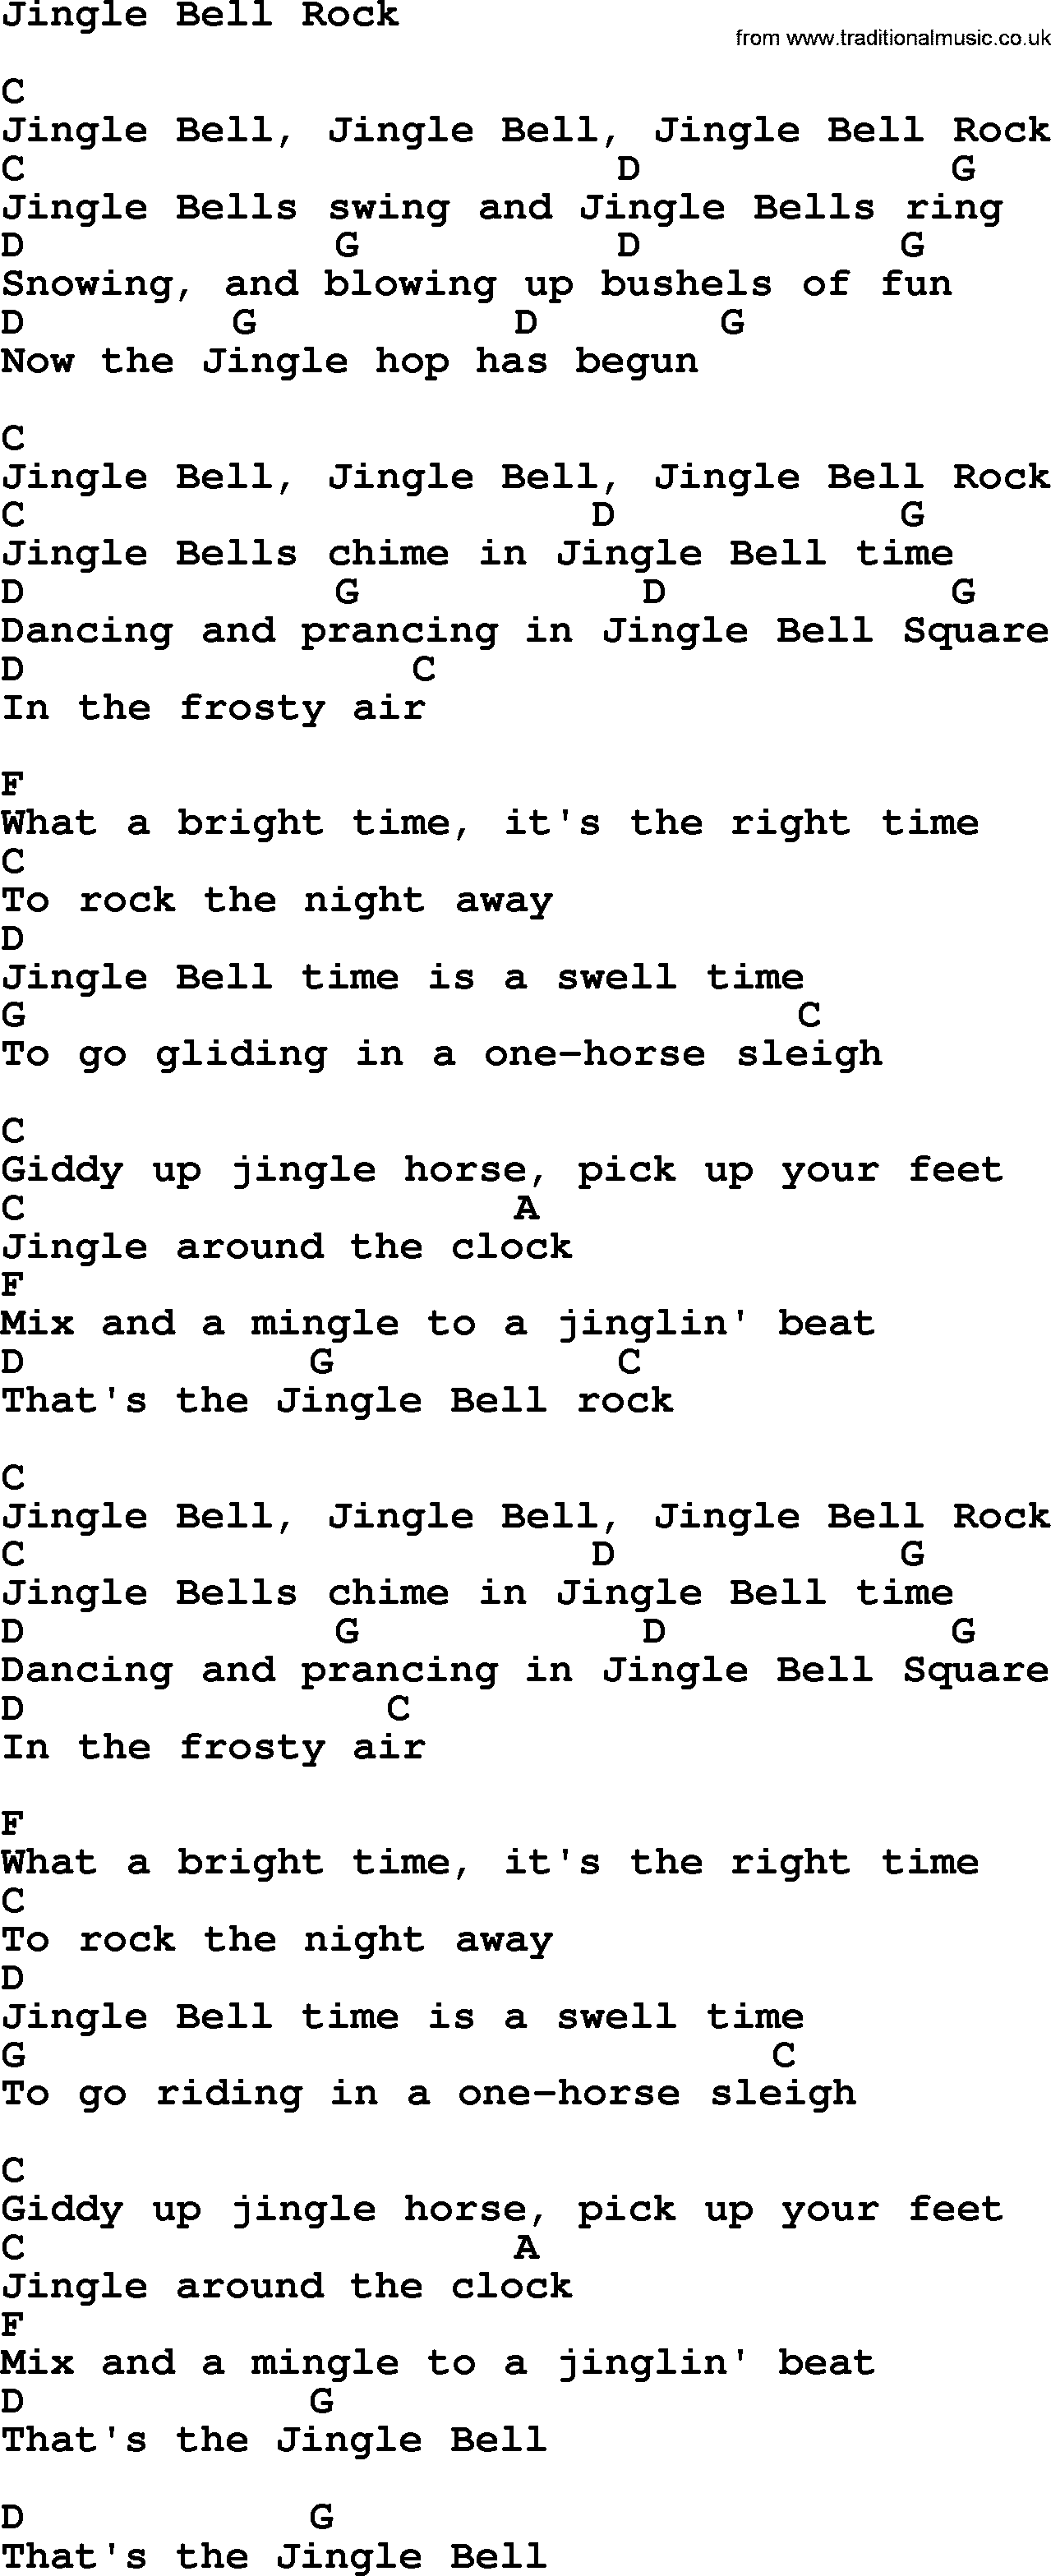 George Strait song: Jingle Bell Rock, lyrics and chords